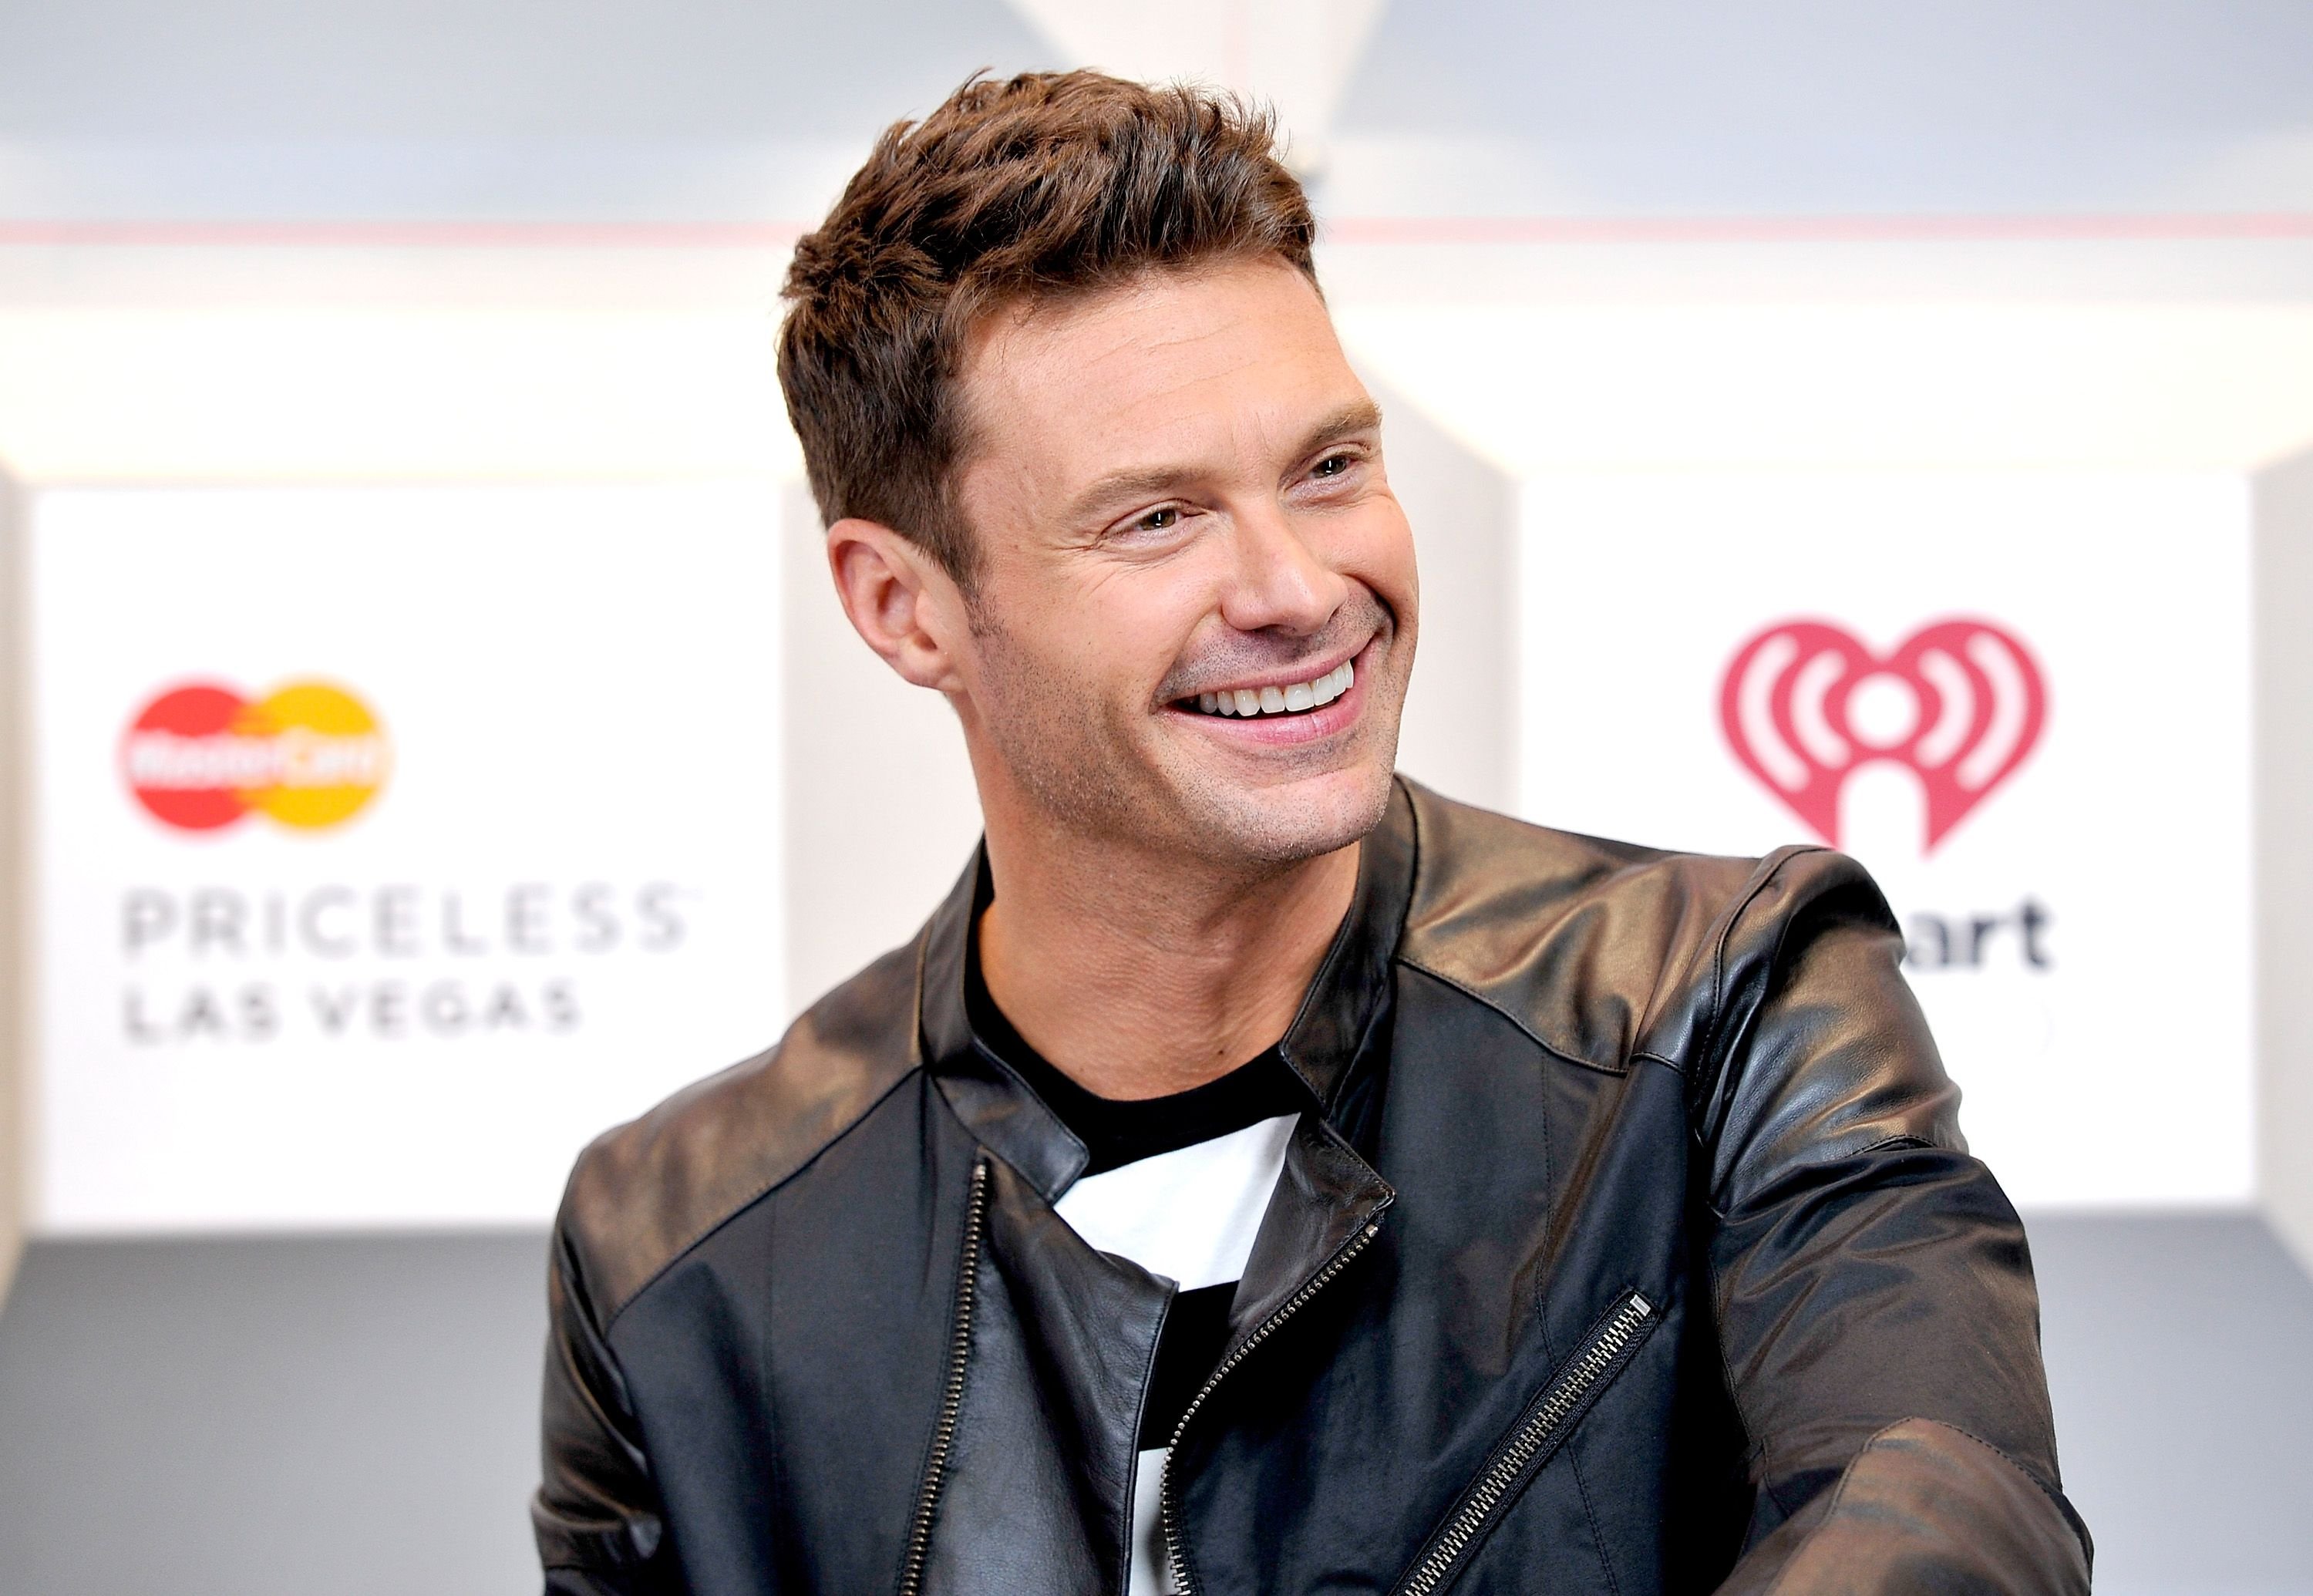 Ryan Seacrest at the iHeartRadio Music Festival on September 19, 2014, in Las Vegas, Nevada | Photo: Getty Images